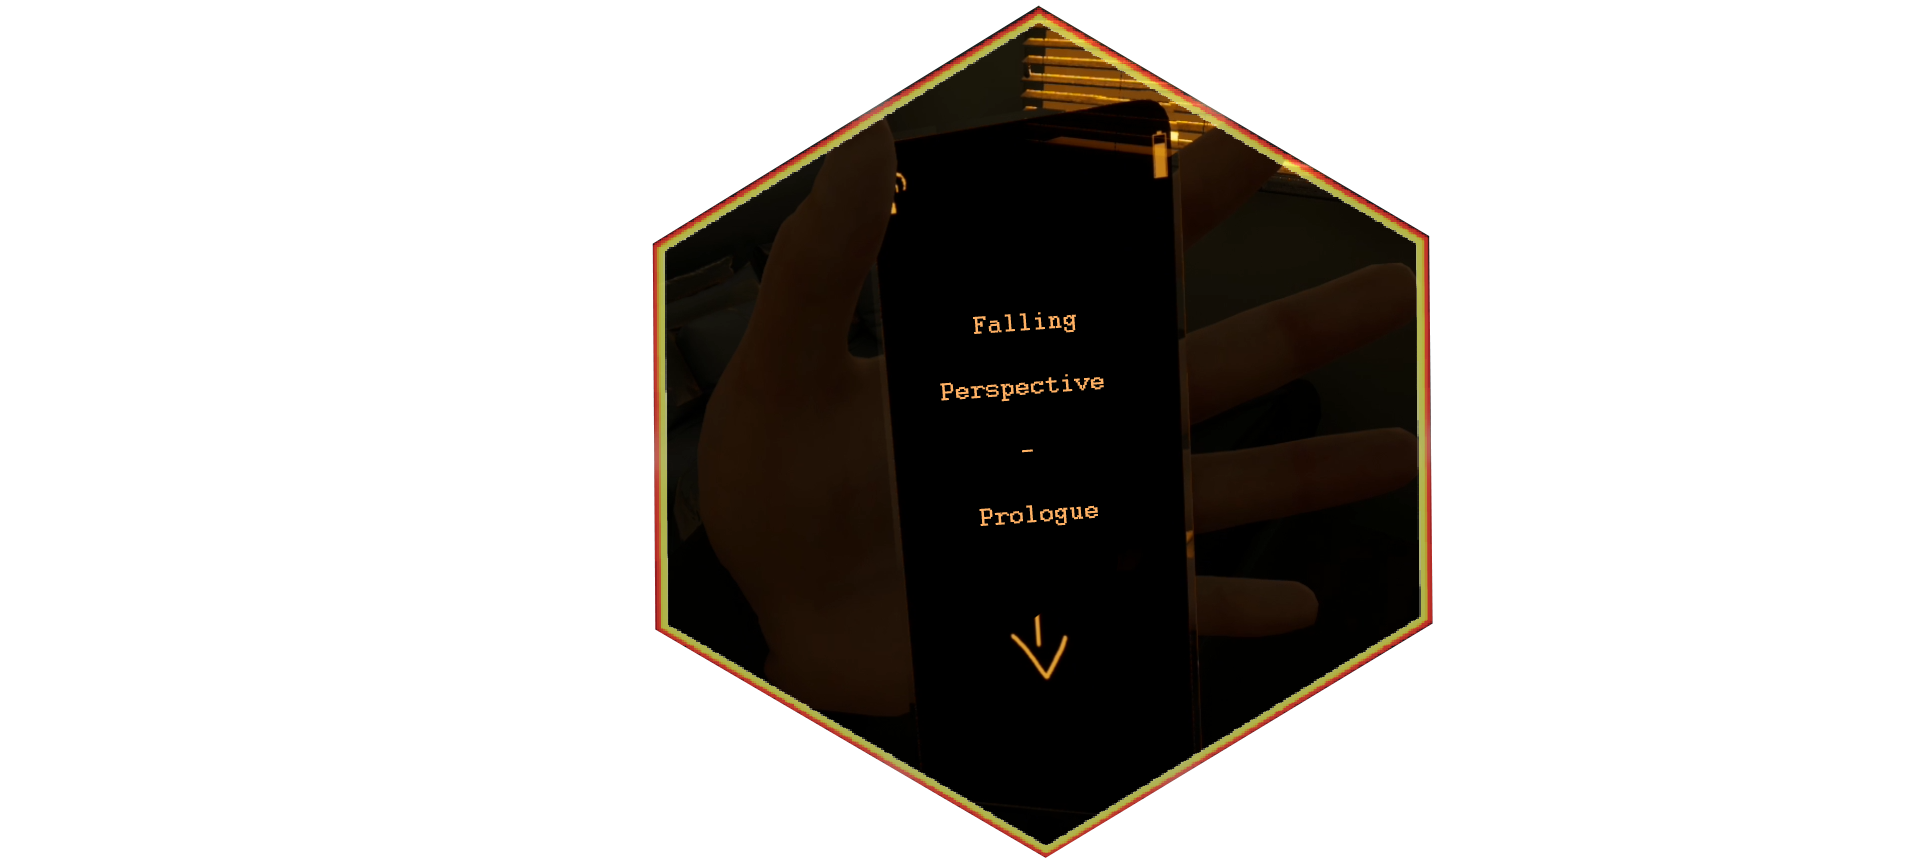 Falling Perspective - Prologue